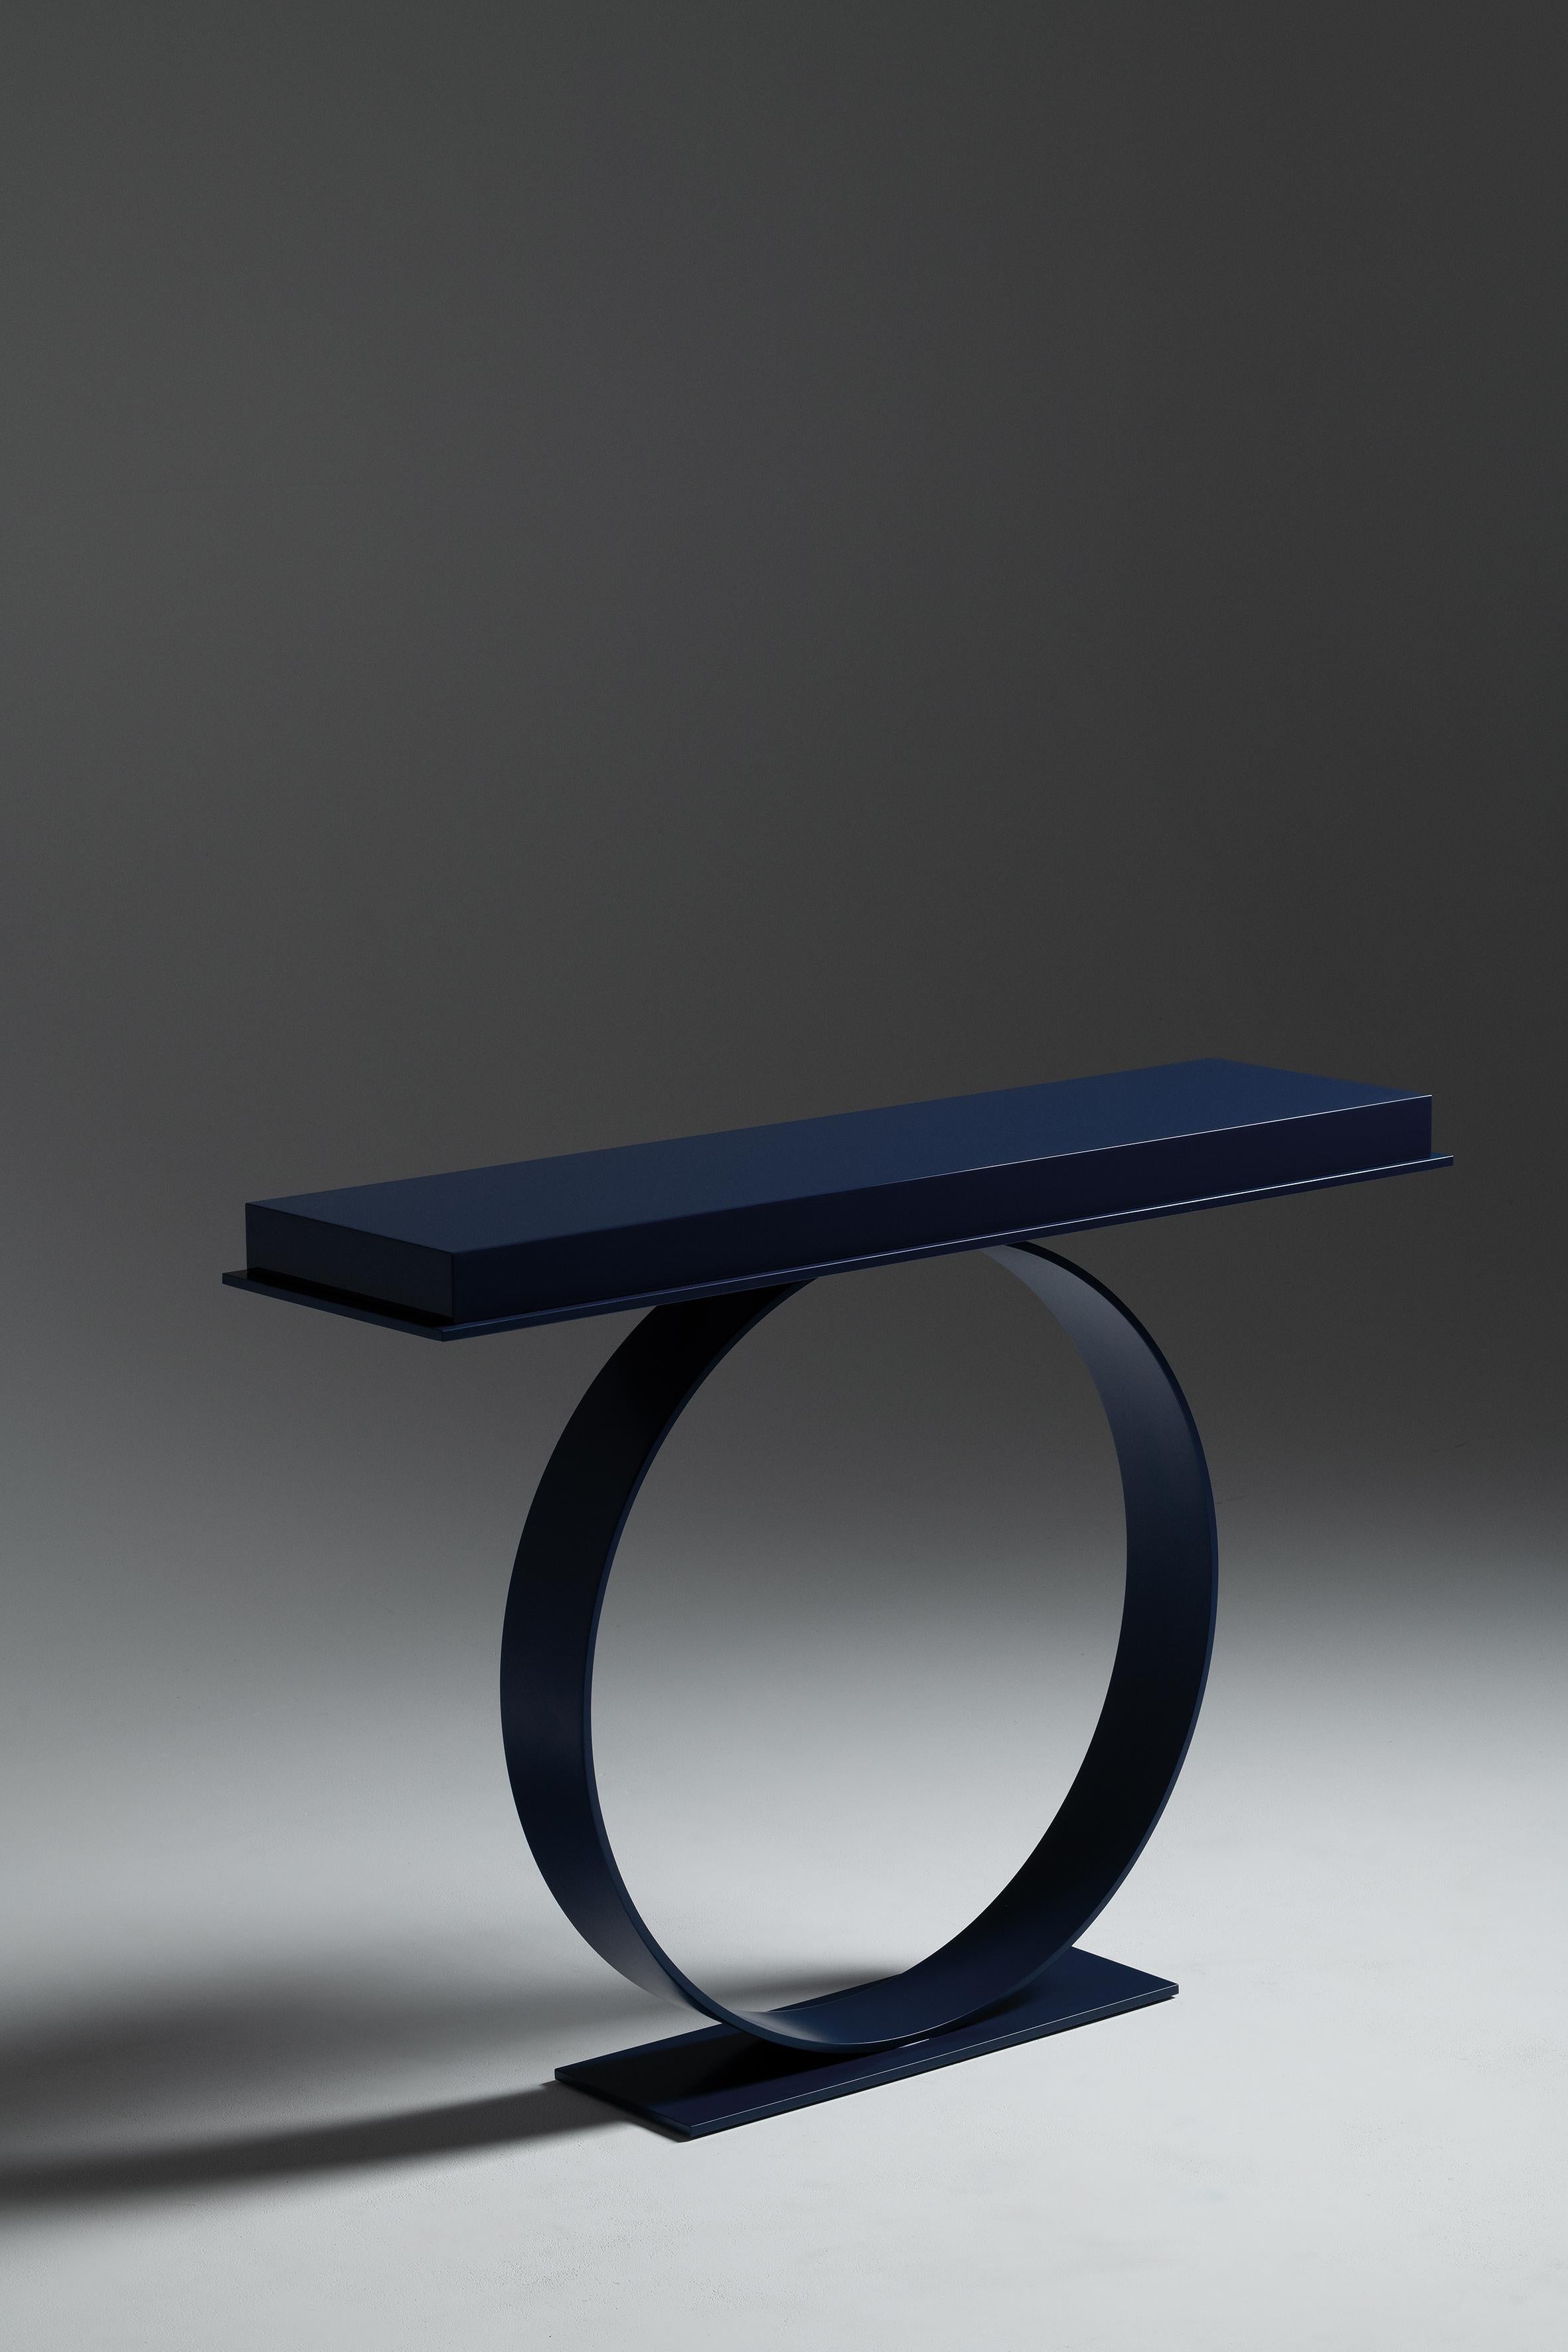 Memphis, France, Le Berre Vevaud
Empreinte Collection
Steel base and wooden tray, glossy blue lacquered finish

For their second collection, Raphaël Le Berre and Thomas Vevaud highlight the 